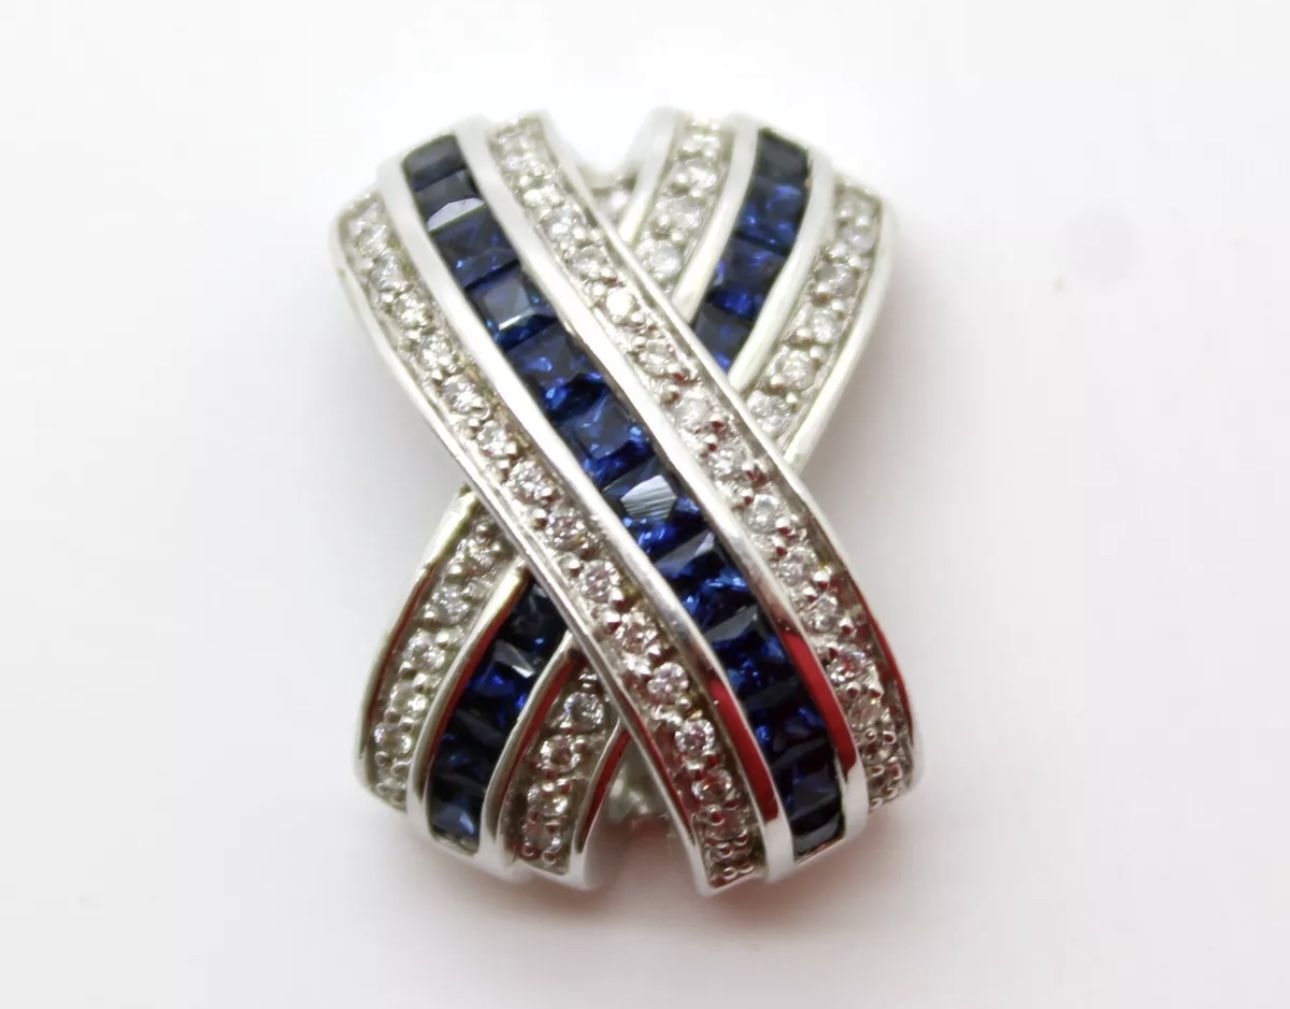 14k Solid White Gold Featuring Diamonds & Blue Sapphires "X" style Pendant